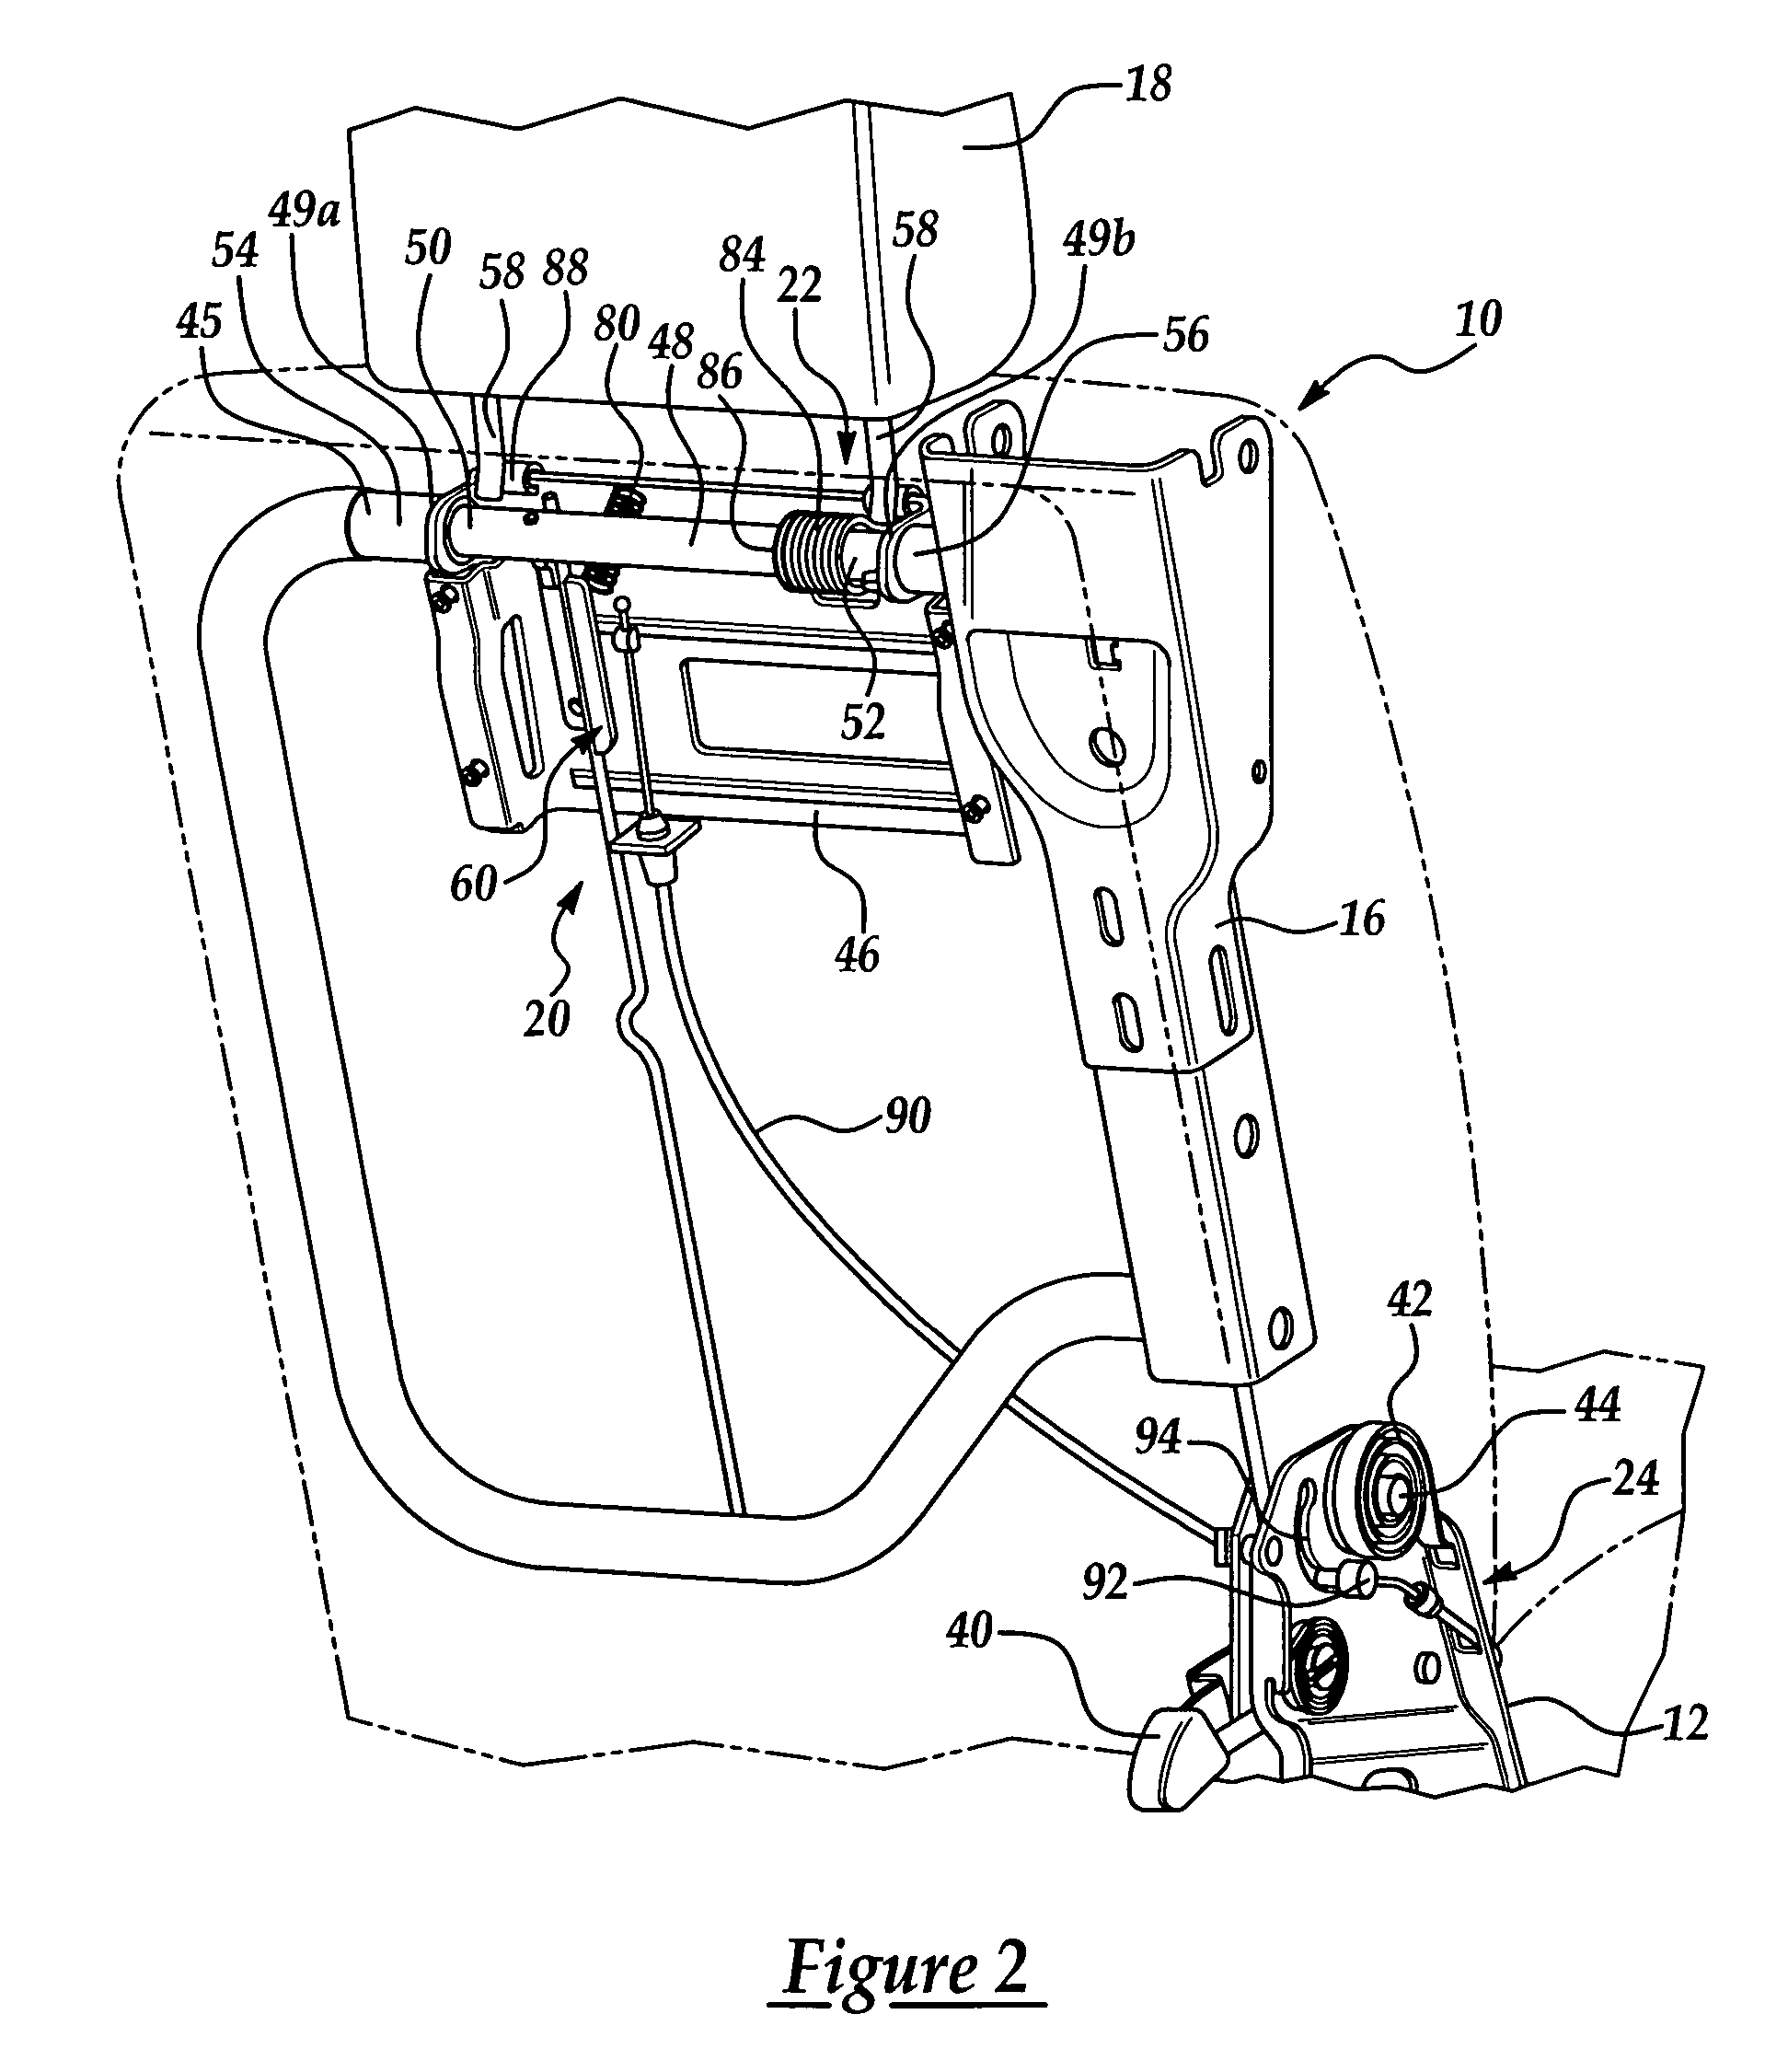 Vehicle seat assembly with biased headrest